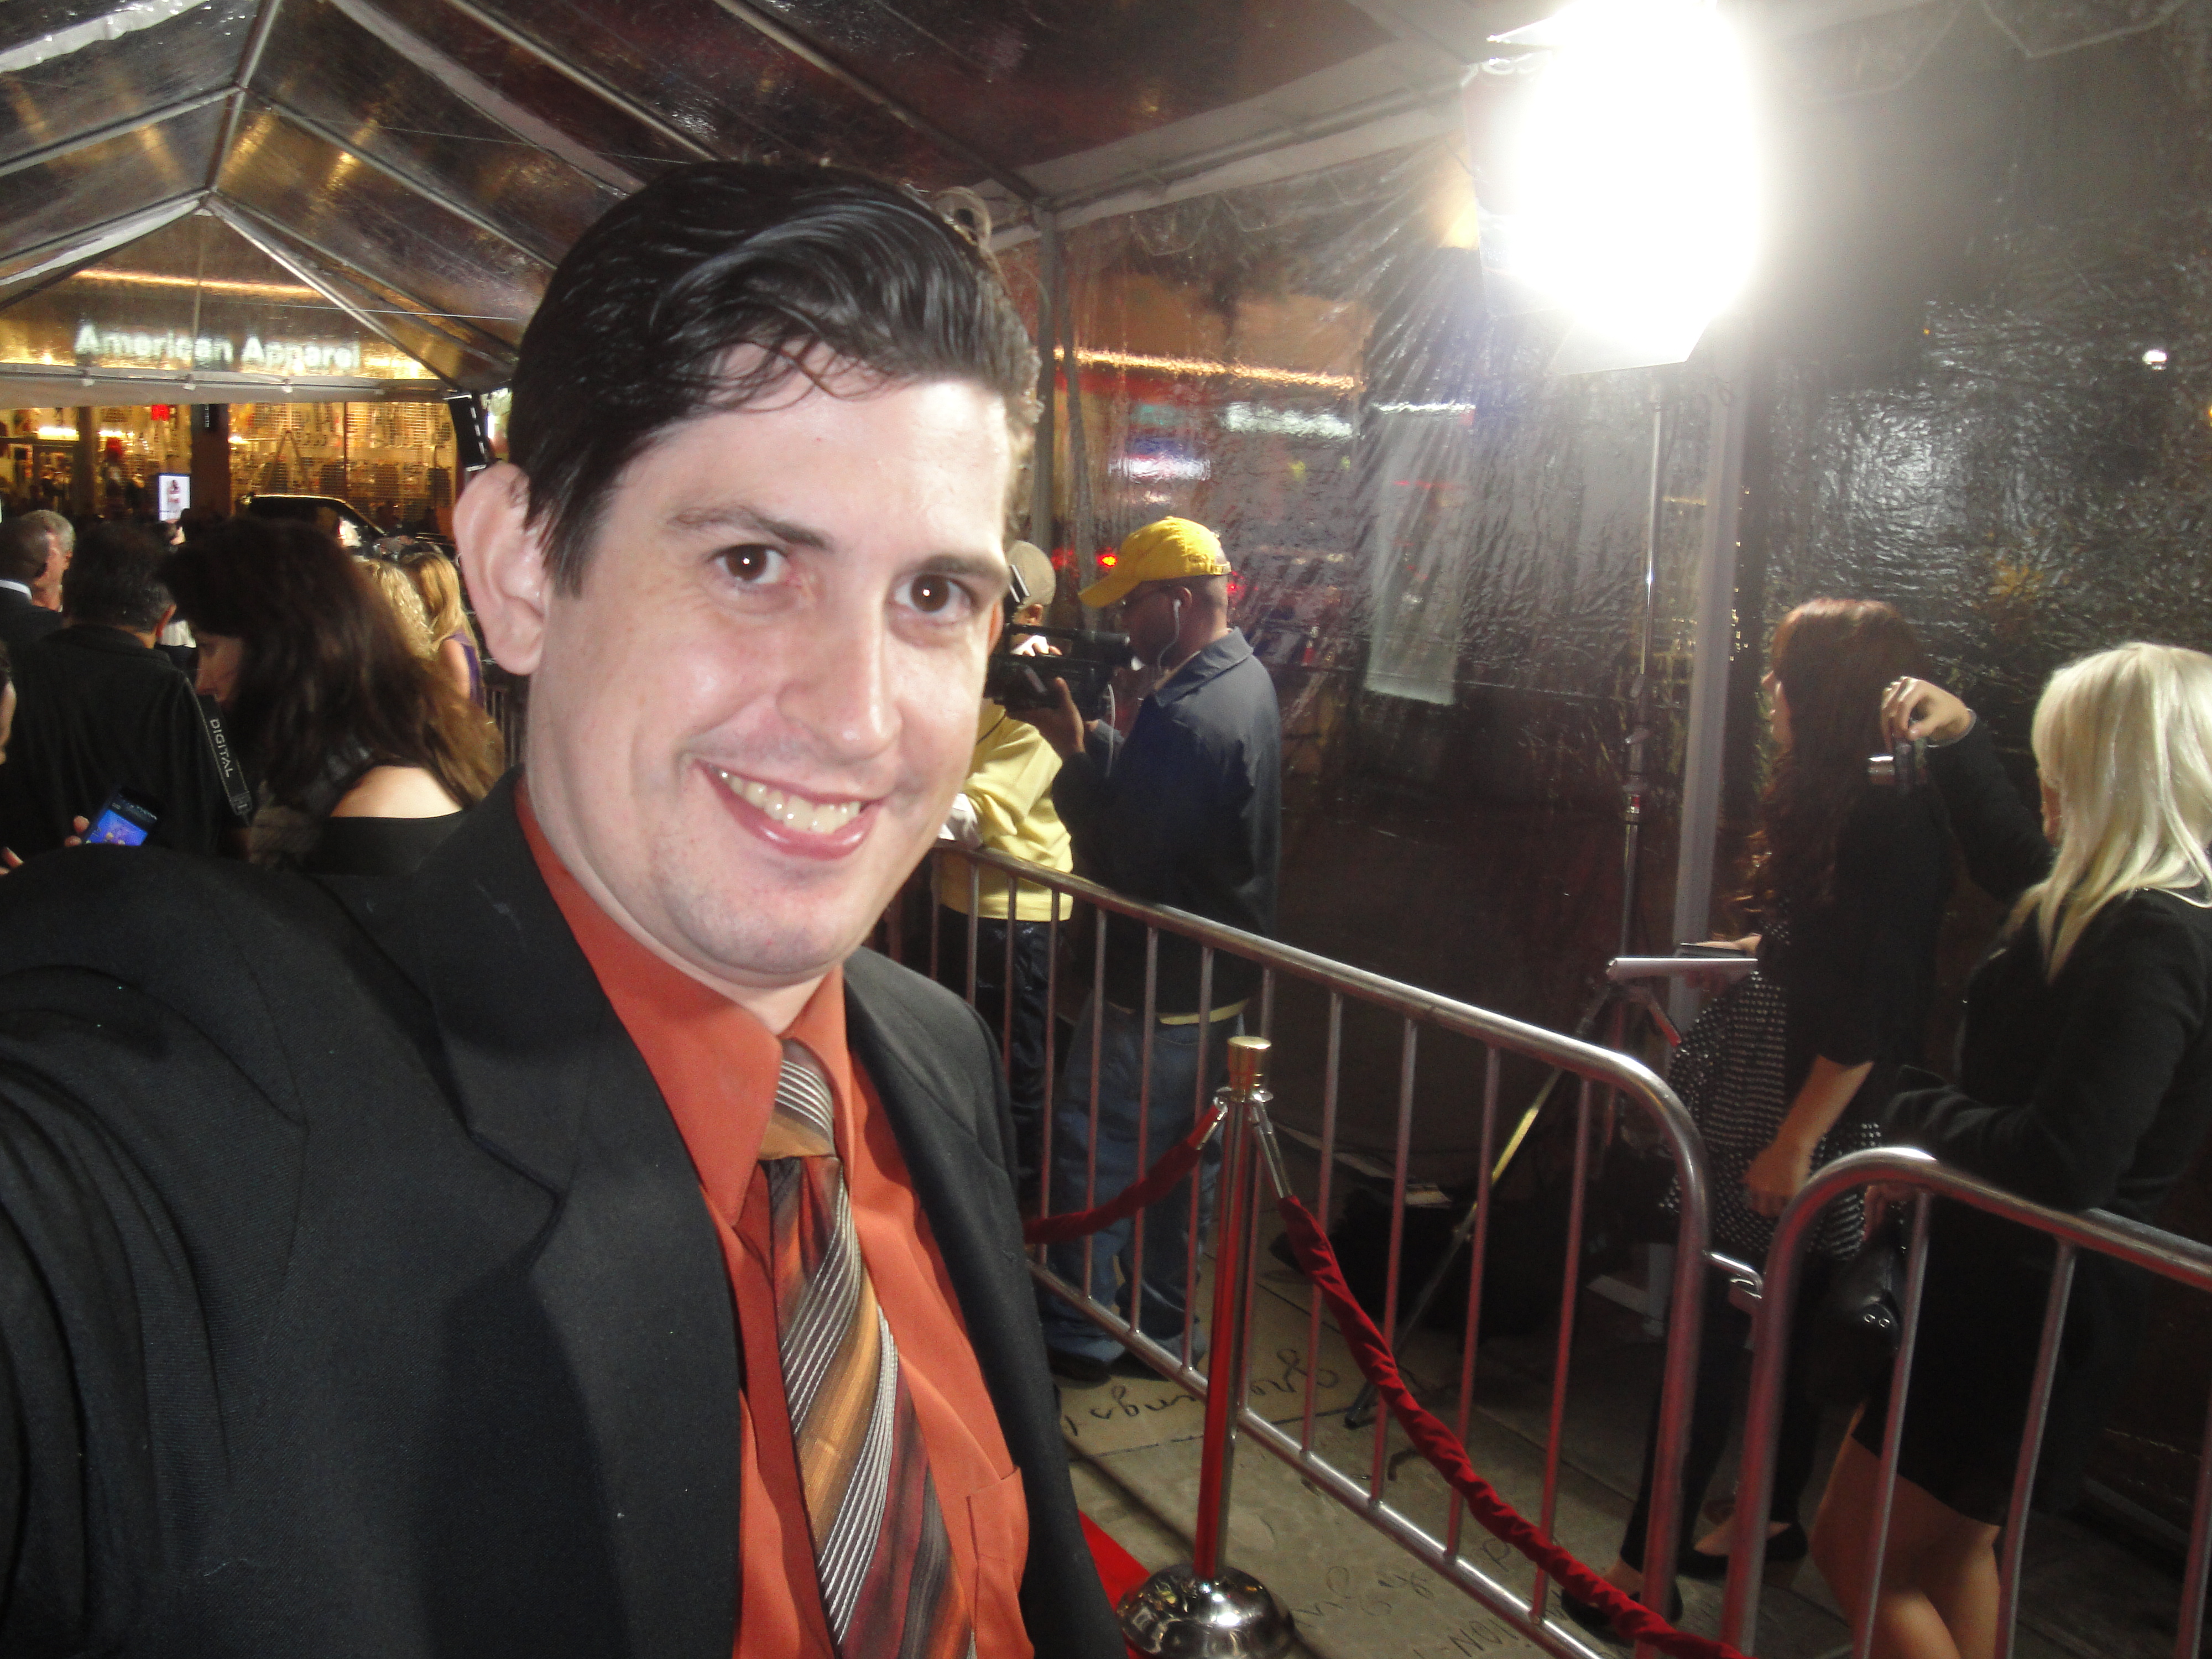 Michael at the premiere of 